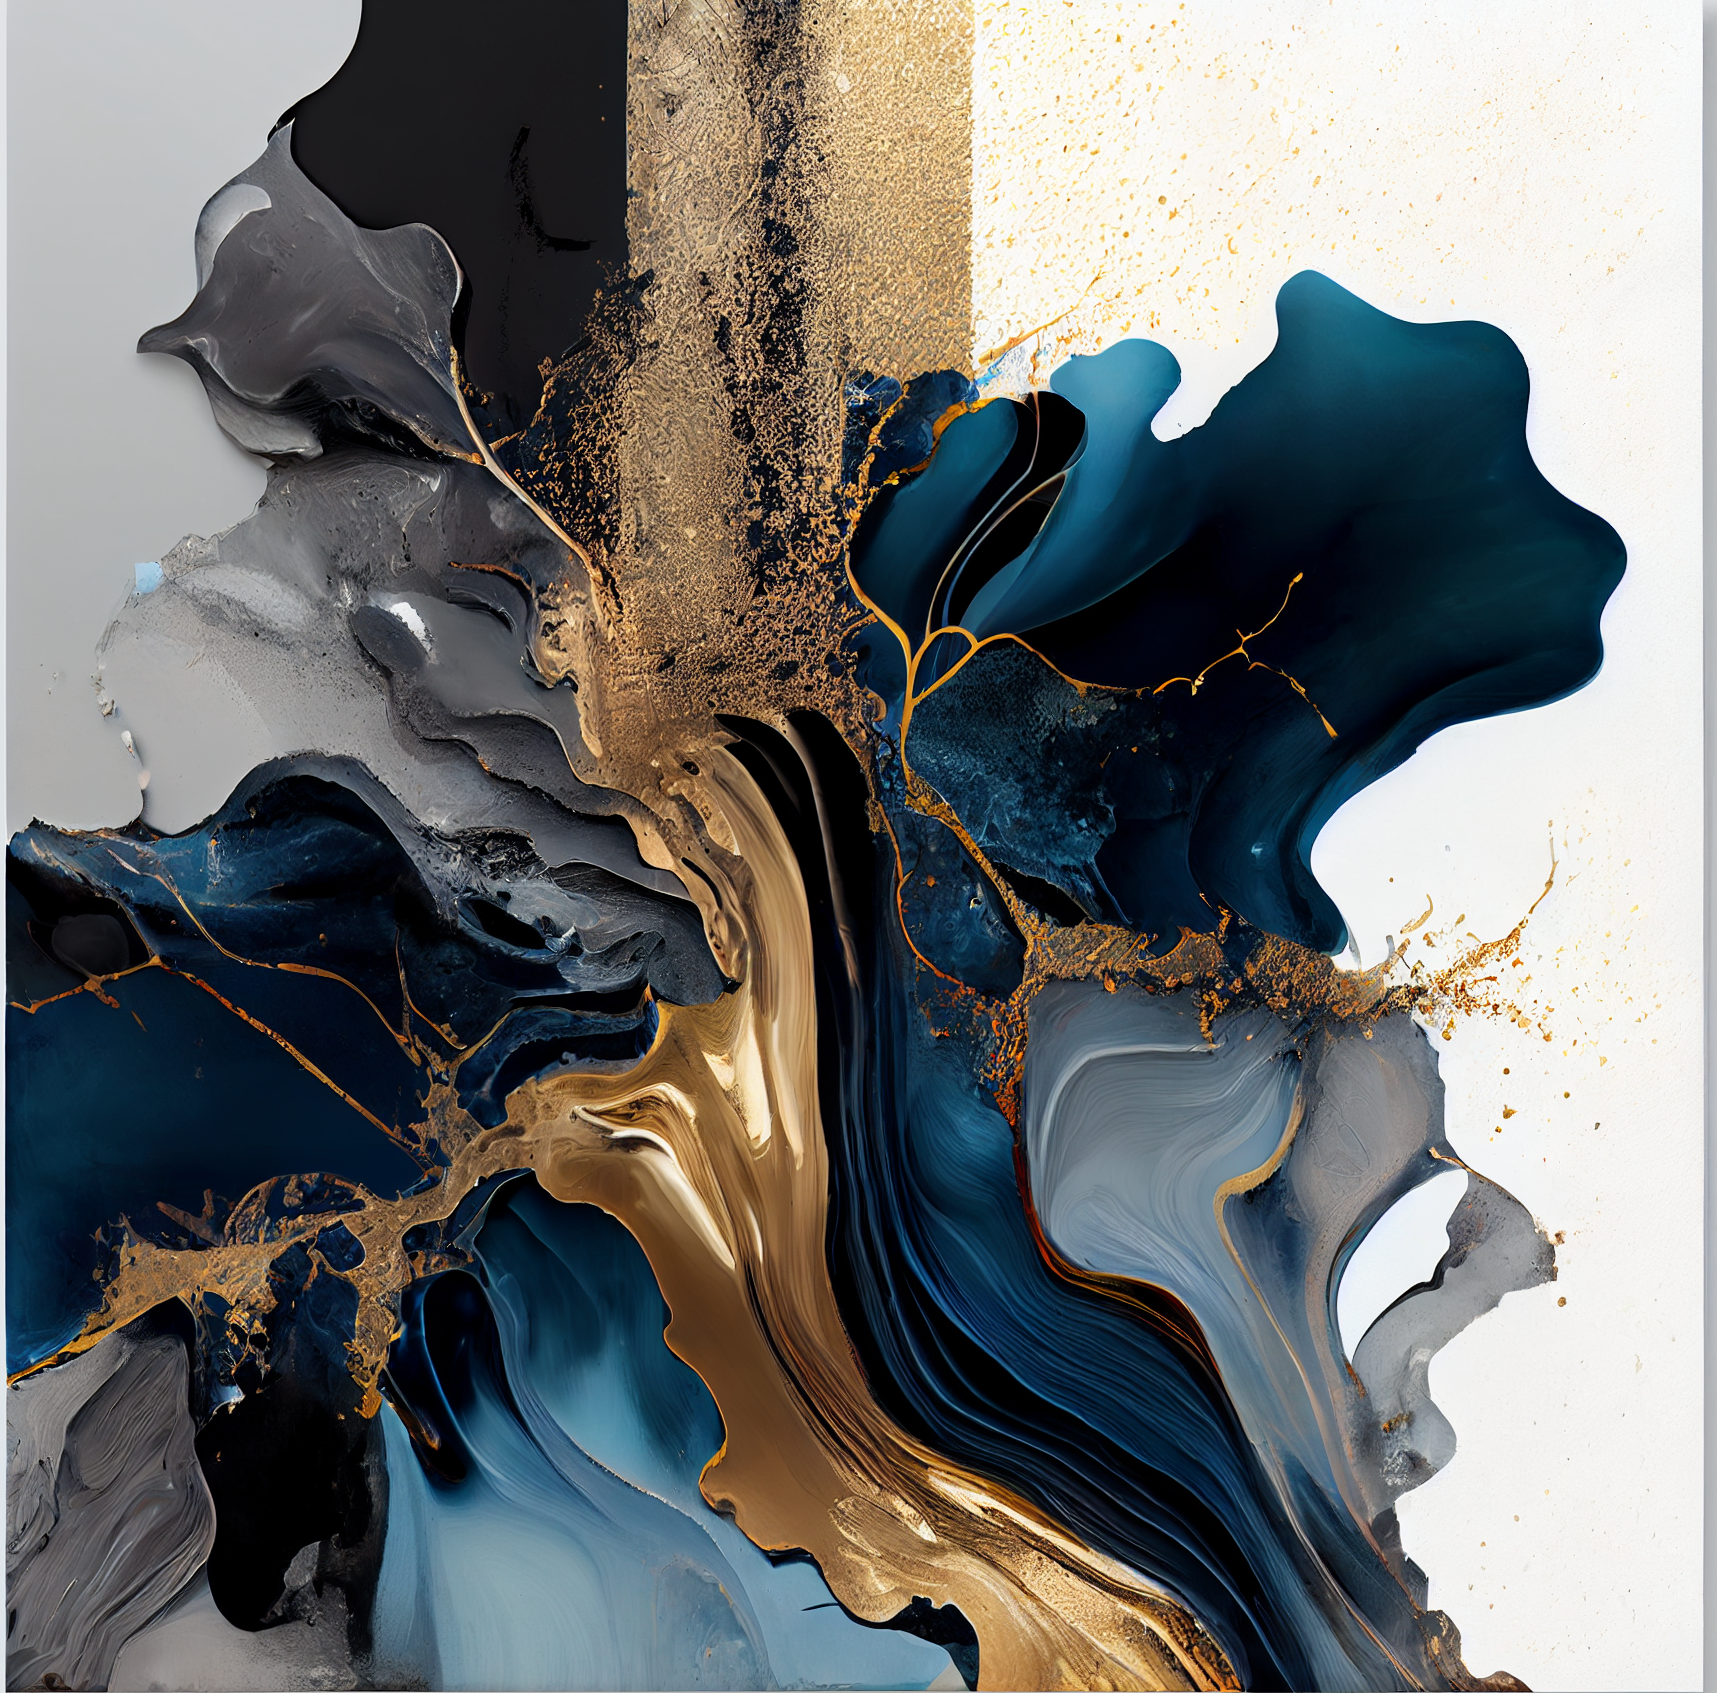 Luxurious Abstract Resin Print in Blue, Grey, Black, & Golden Shades for Living Room, Home Decor & Gift Option